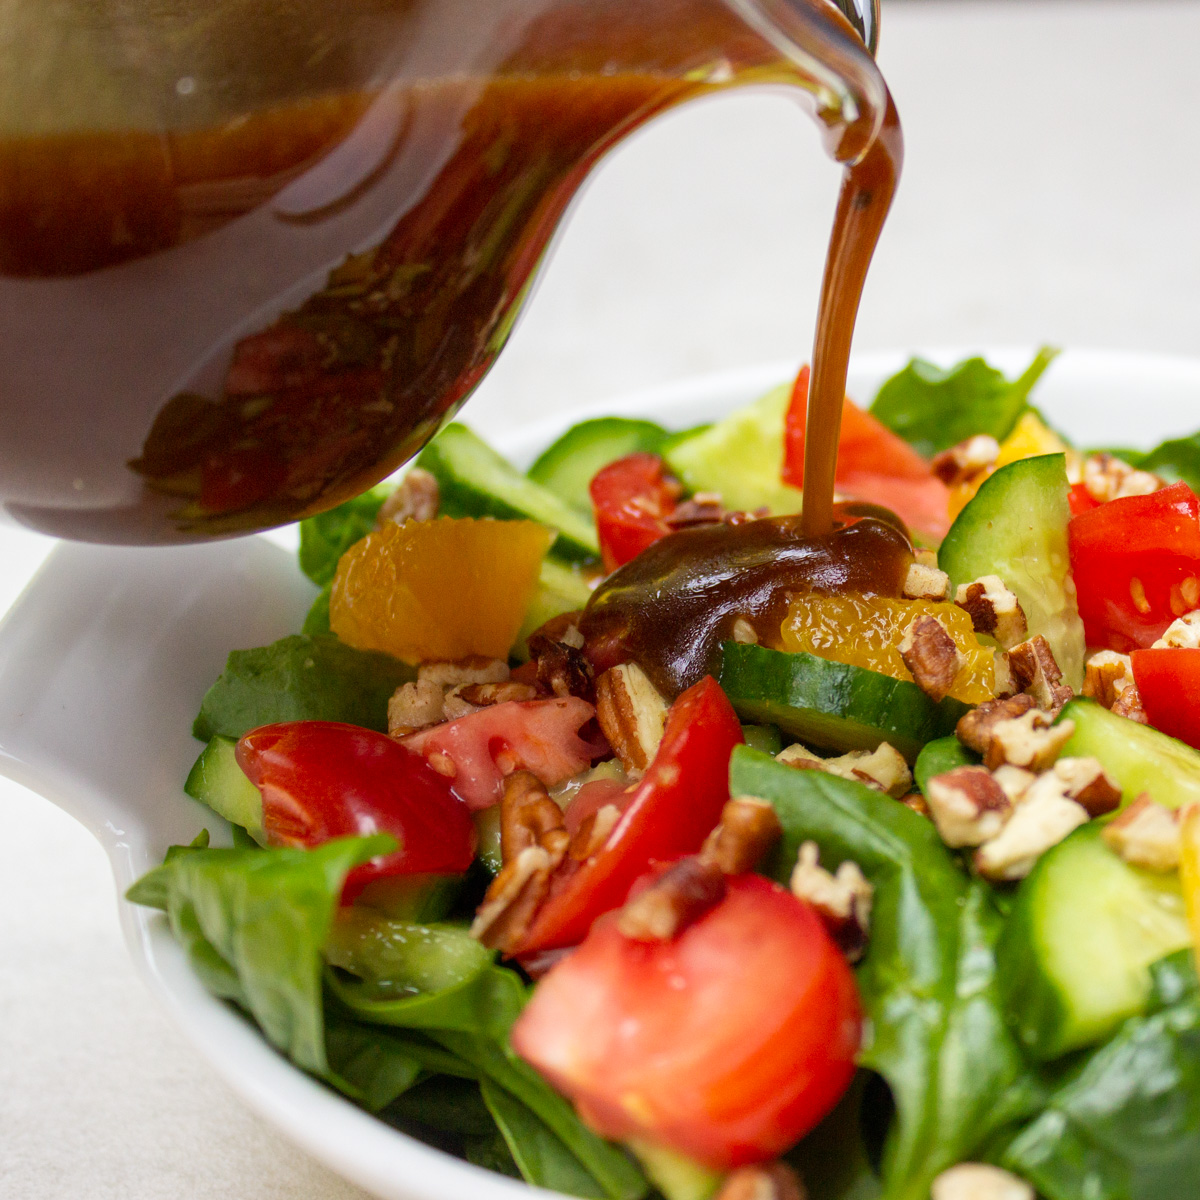 Best Maple Balsamic Dressing (2 Minutes)